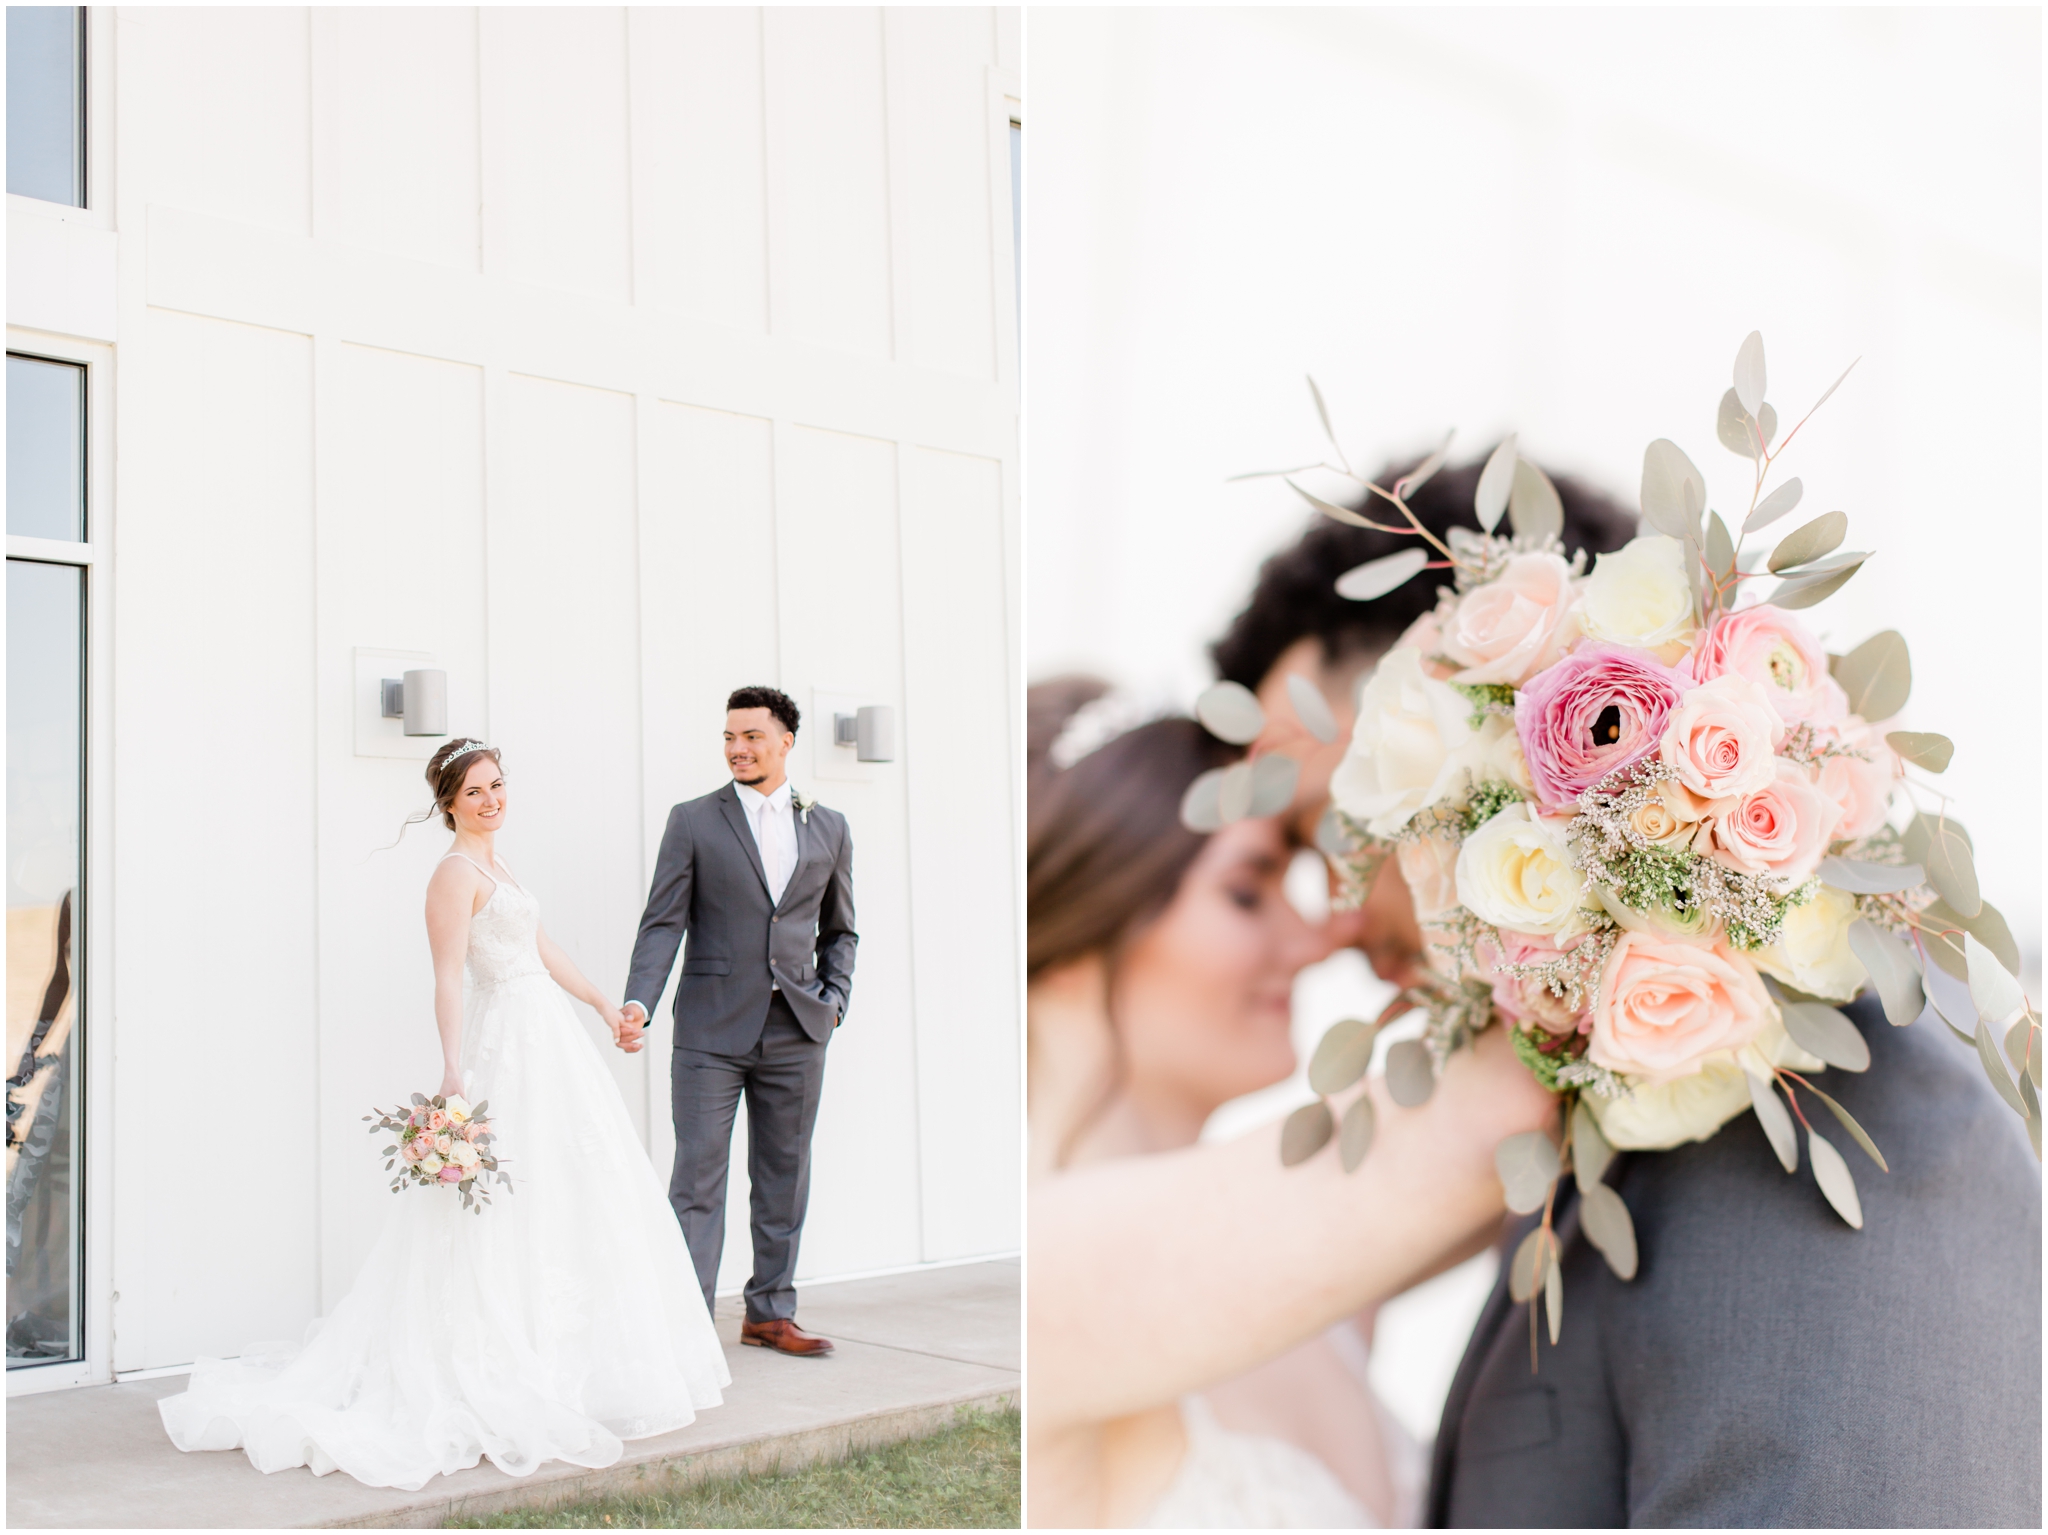 rebekah & shawn's spring wedding at the ruby cora with wedding photographer alyssa rachelle photography